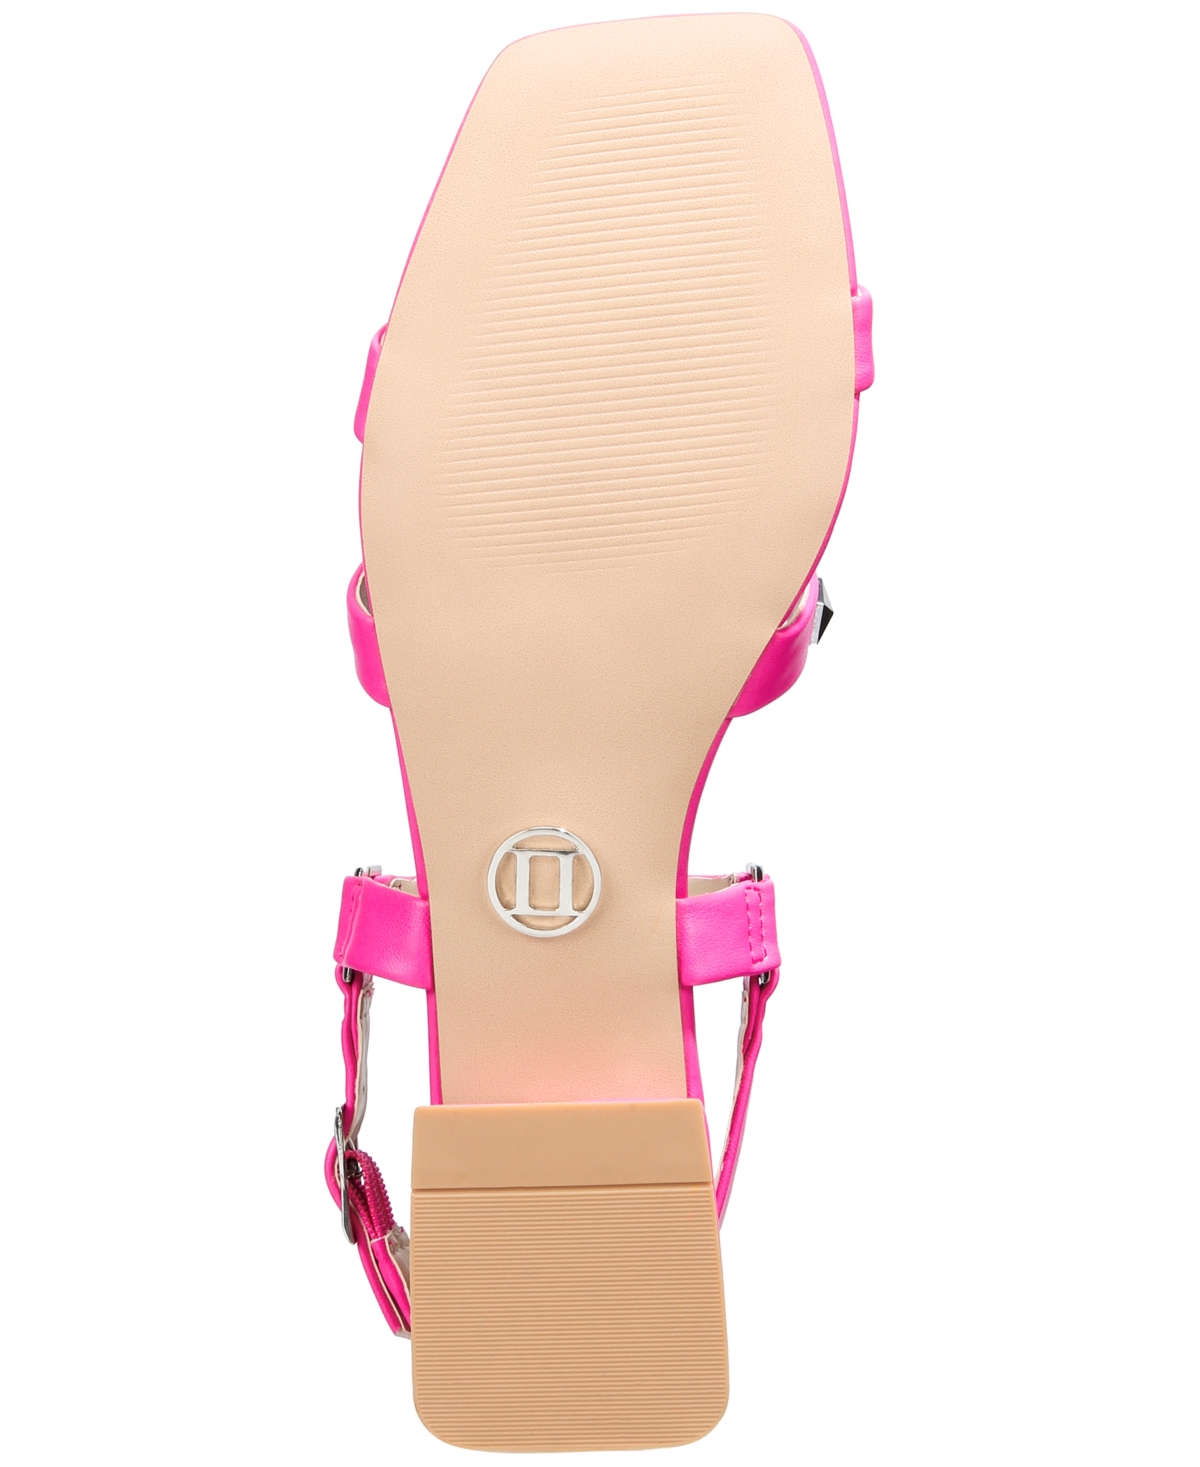 Shop Things Ii Come Women's Audrey Luxurious Studded Gladiator Sandals In Shocking Pink